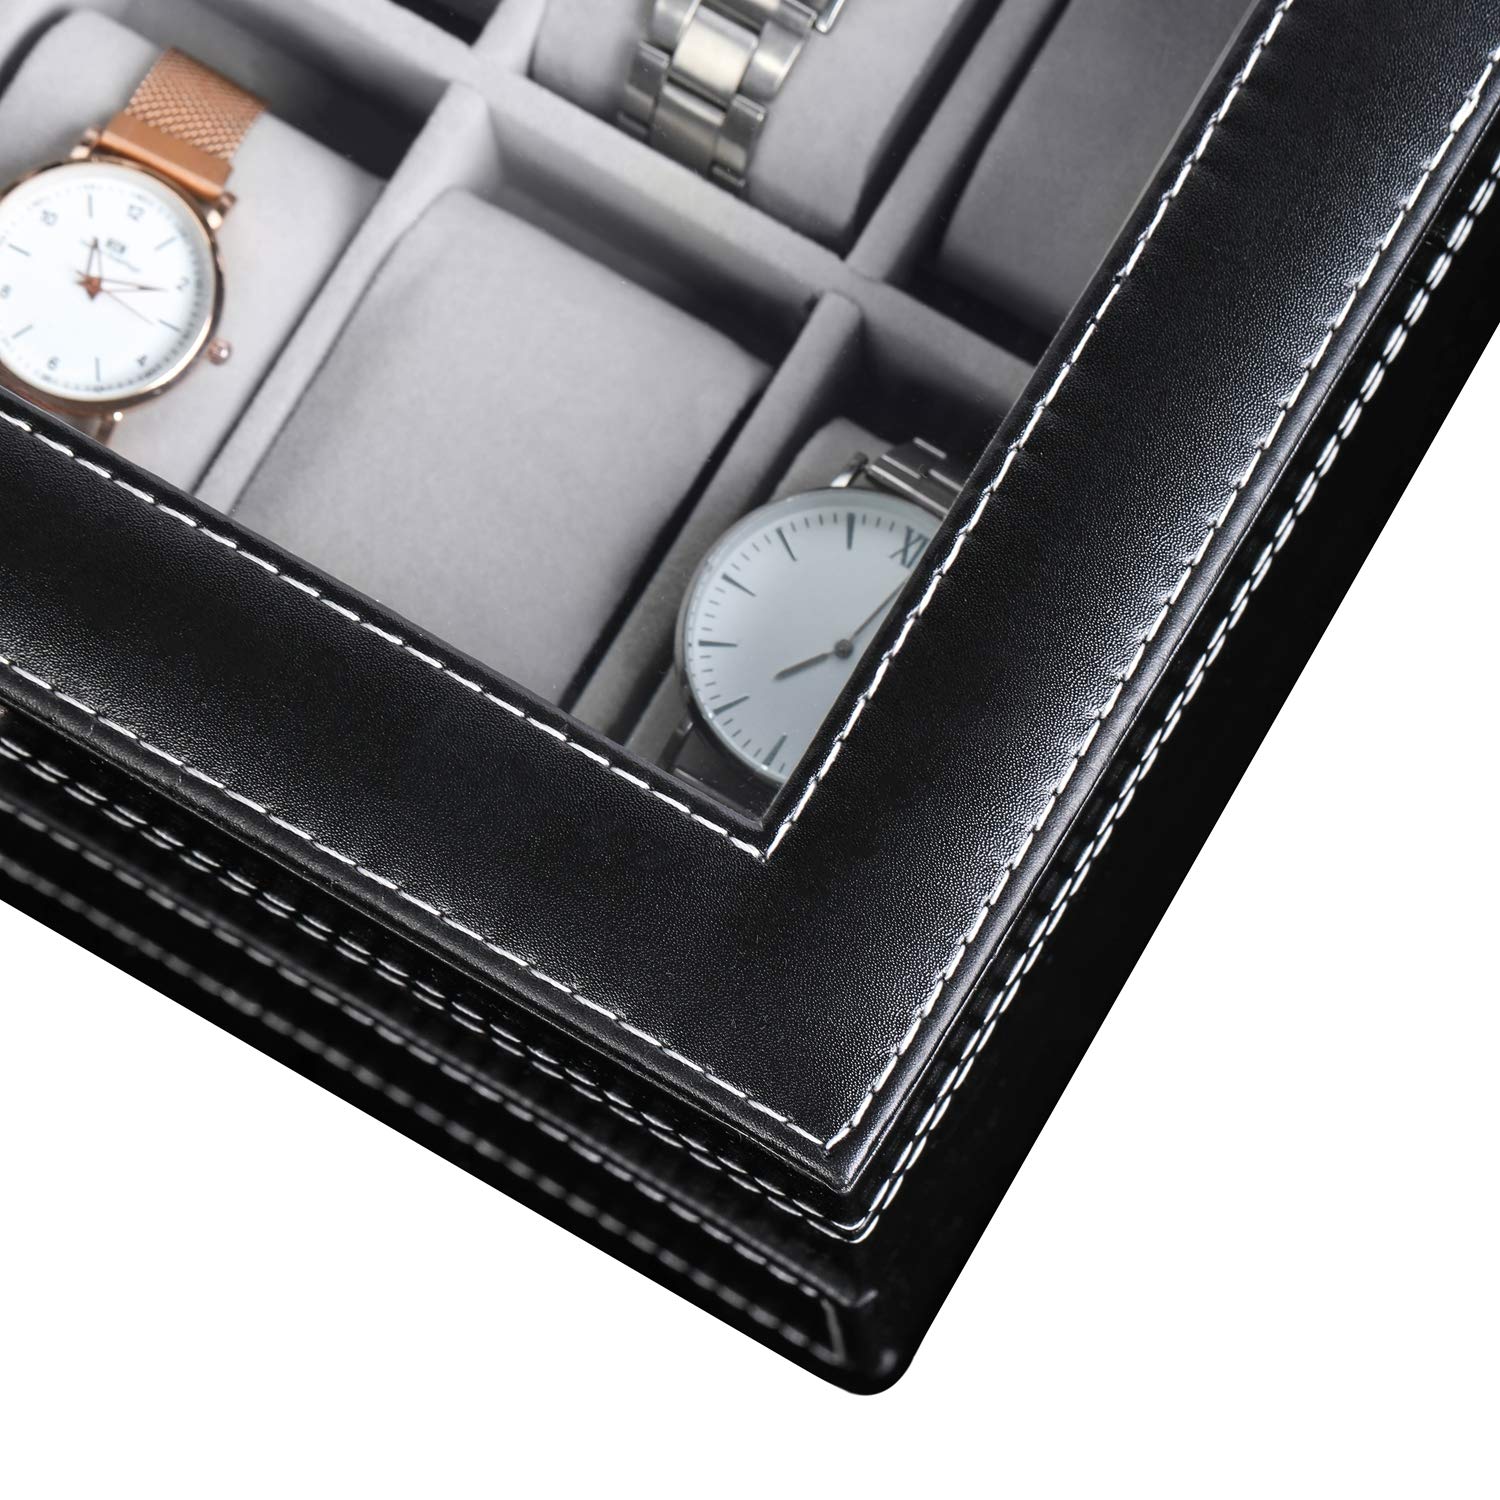 BASTUO Watch Box for Men 20 Watch Display Case Organizer with PU Leather Watch Storage Case, Jewelry Collection Organizer Large Glass Top, Black